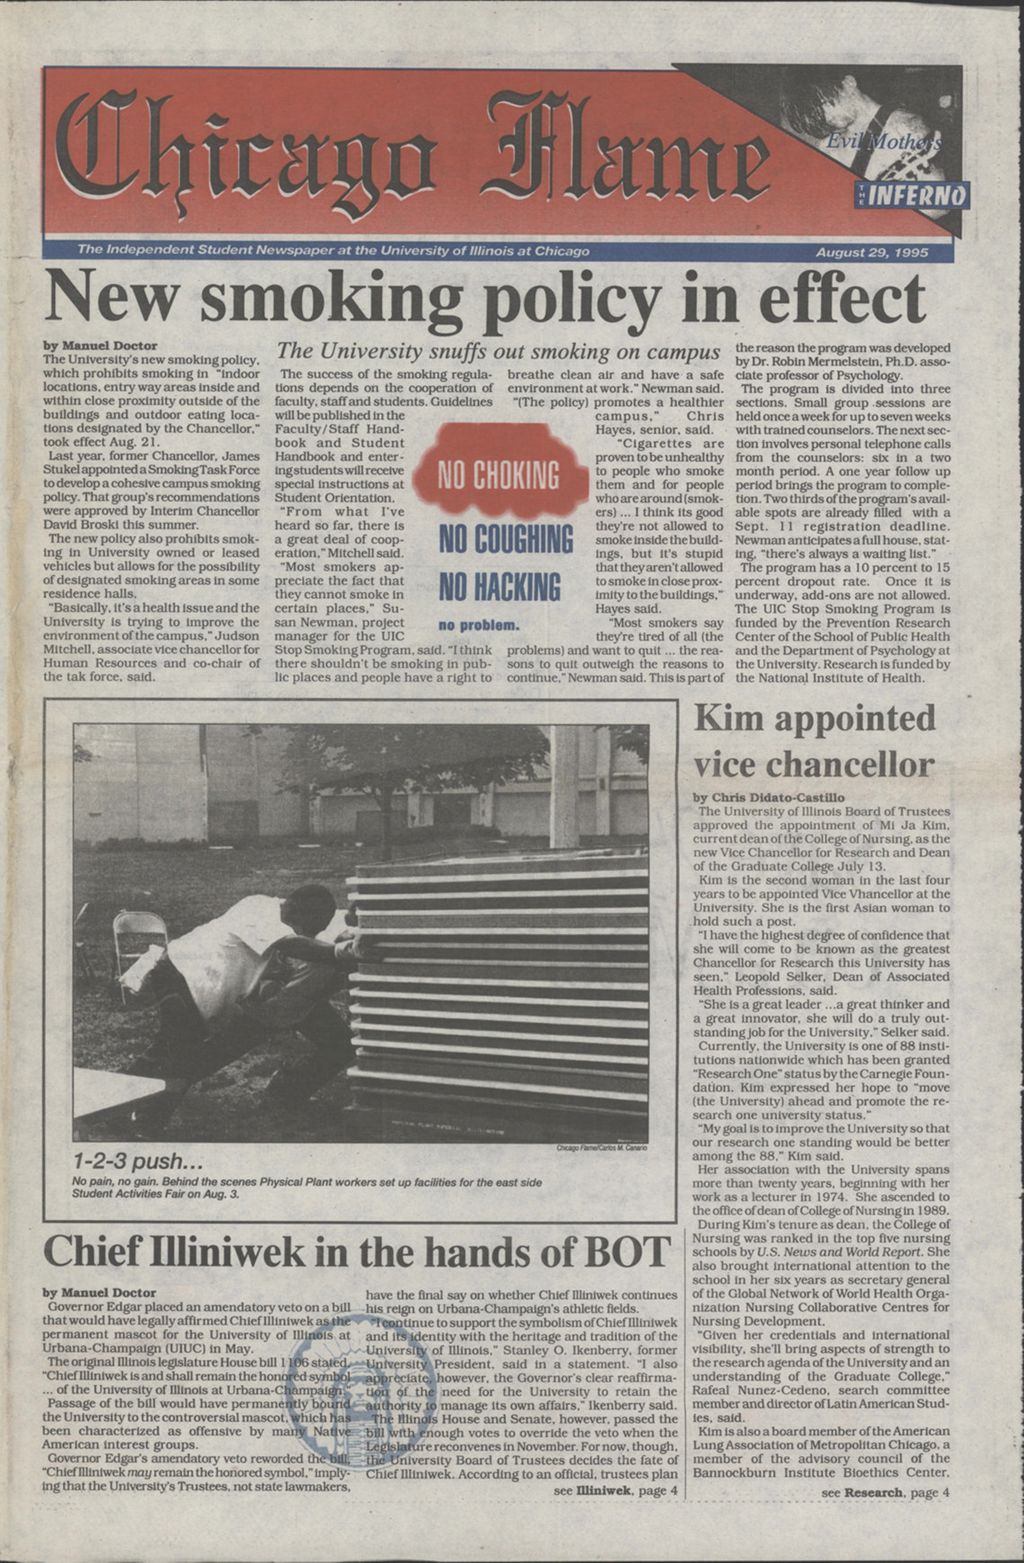 Chicago Flame (August 29, 1995)